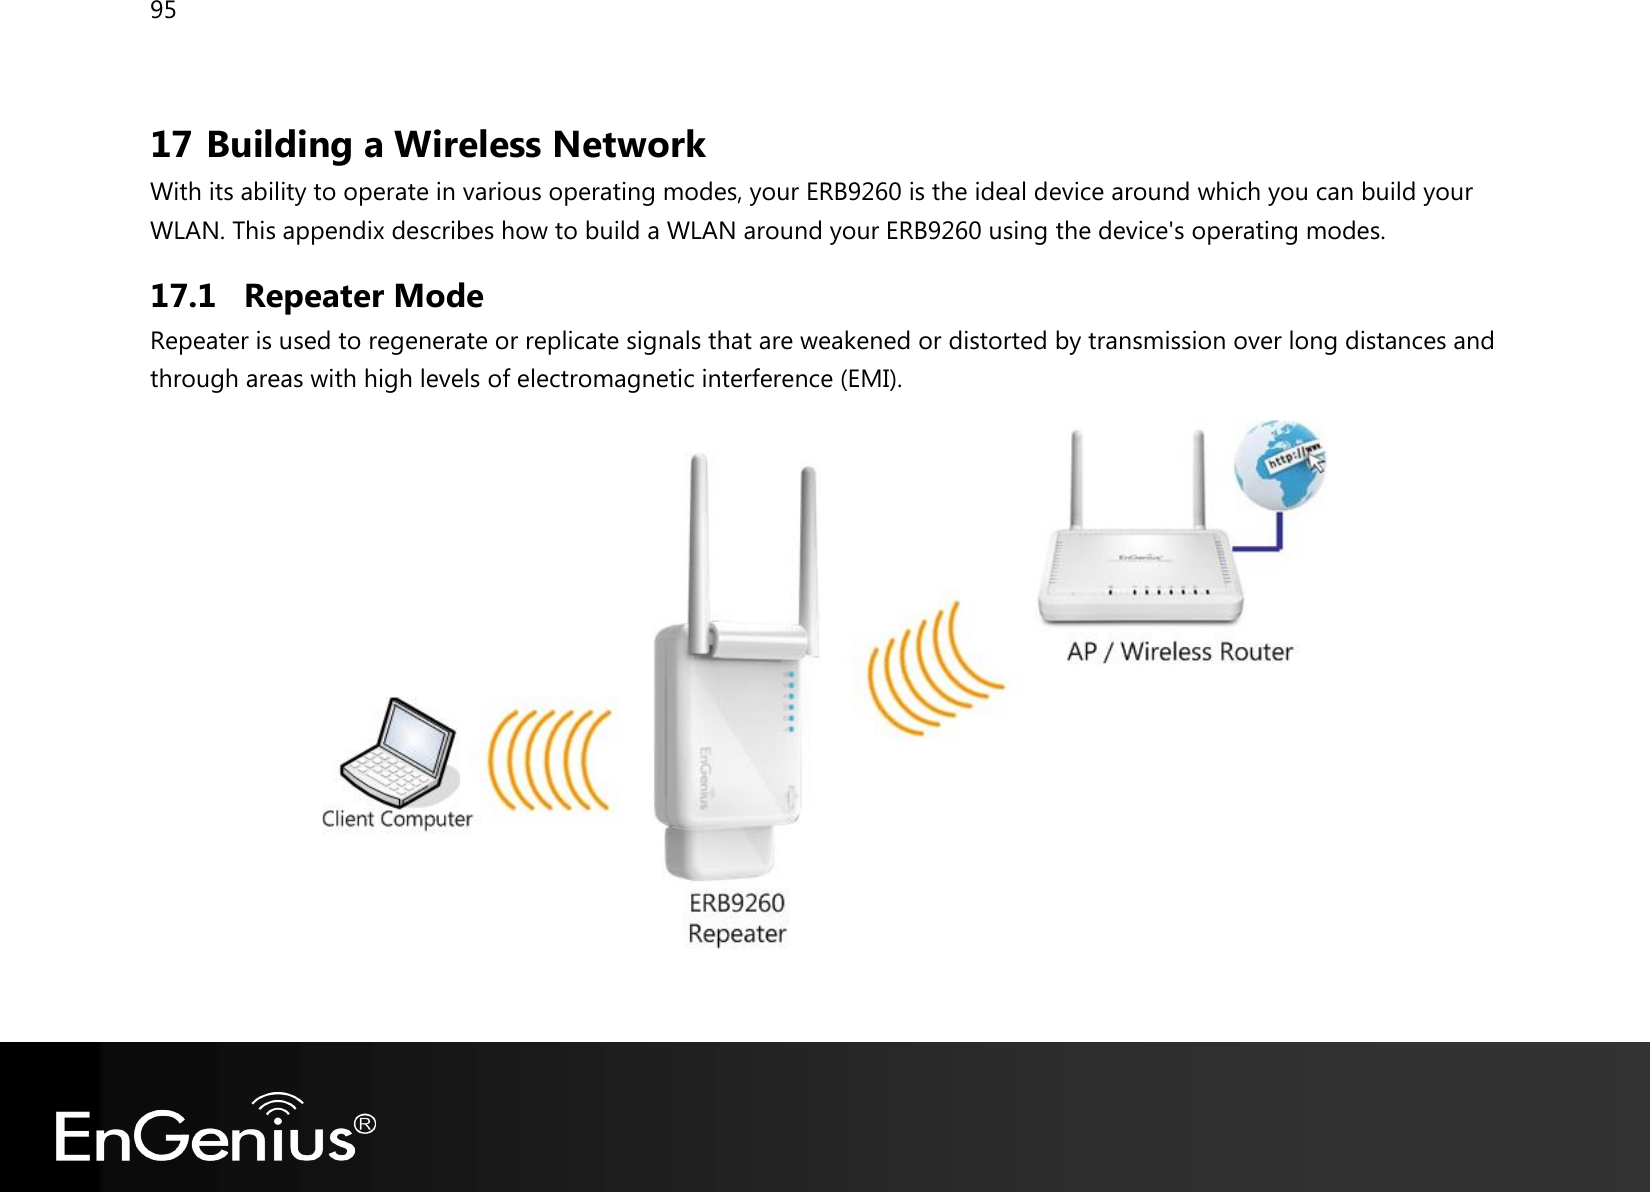 95  17 Building a Wireless Network With its ability to operate in various operating modes, your ERB9260 is the ideal device around which you can build your WLAN. This appendix describes how to build a WLAN around your ERB9260 using the device&apos;s operating modes. 17.1 Repeater Mode Repeater is used to regenerate or replicate signals that are weakened or distorted by transmission over long distances and through areas with high levels of electromagnetic interference (EMI).    